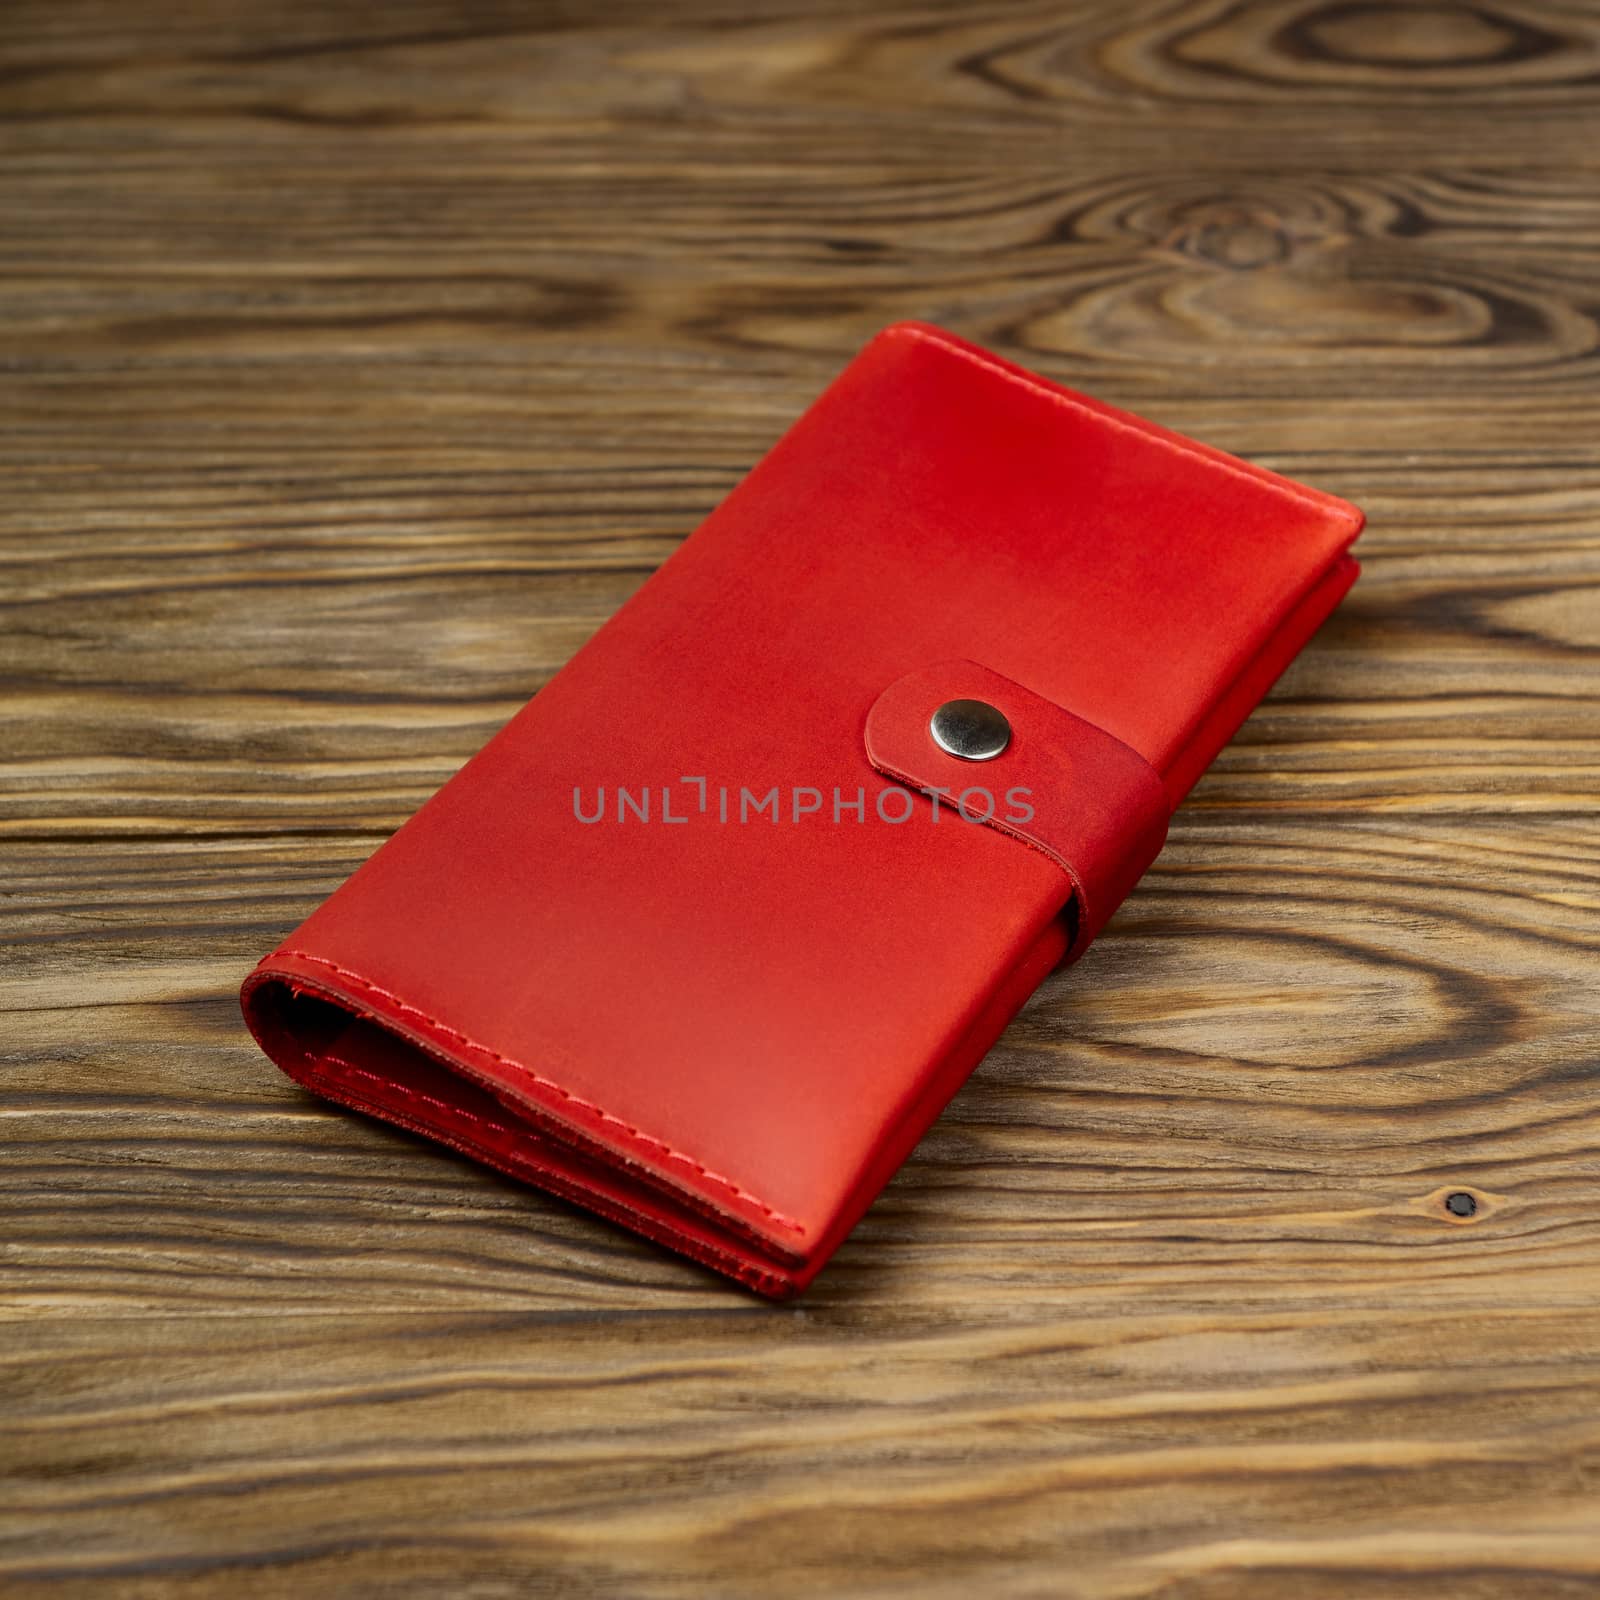 Hue red color handmade leather wallet on textured wooden background. Wallet is unisex. Side view. Stock photo of luxury accessories. by alexsdriver